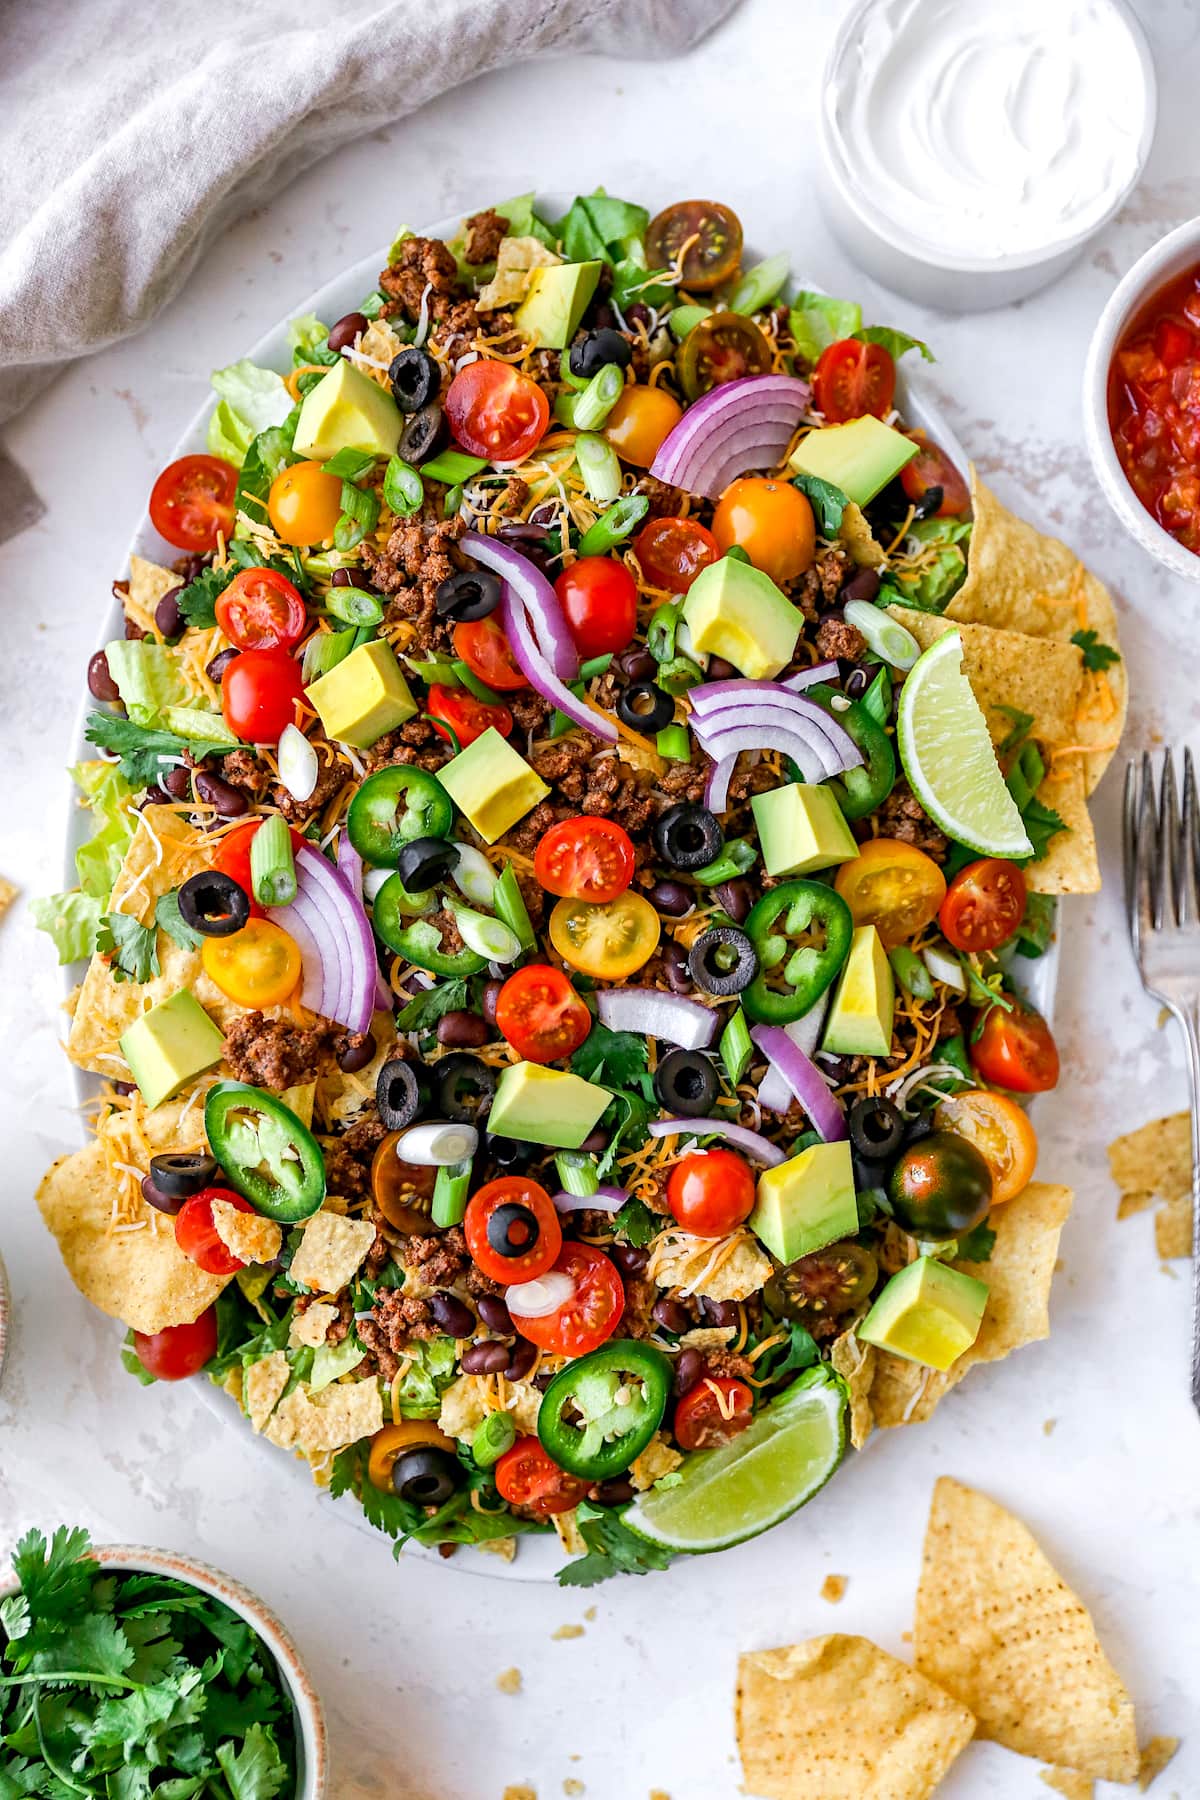 A simple bean salad and a build-your-own tortilla bowl: 20 best